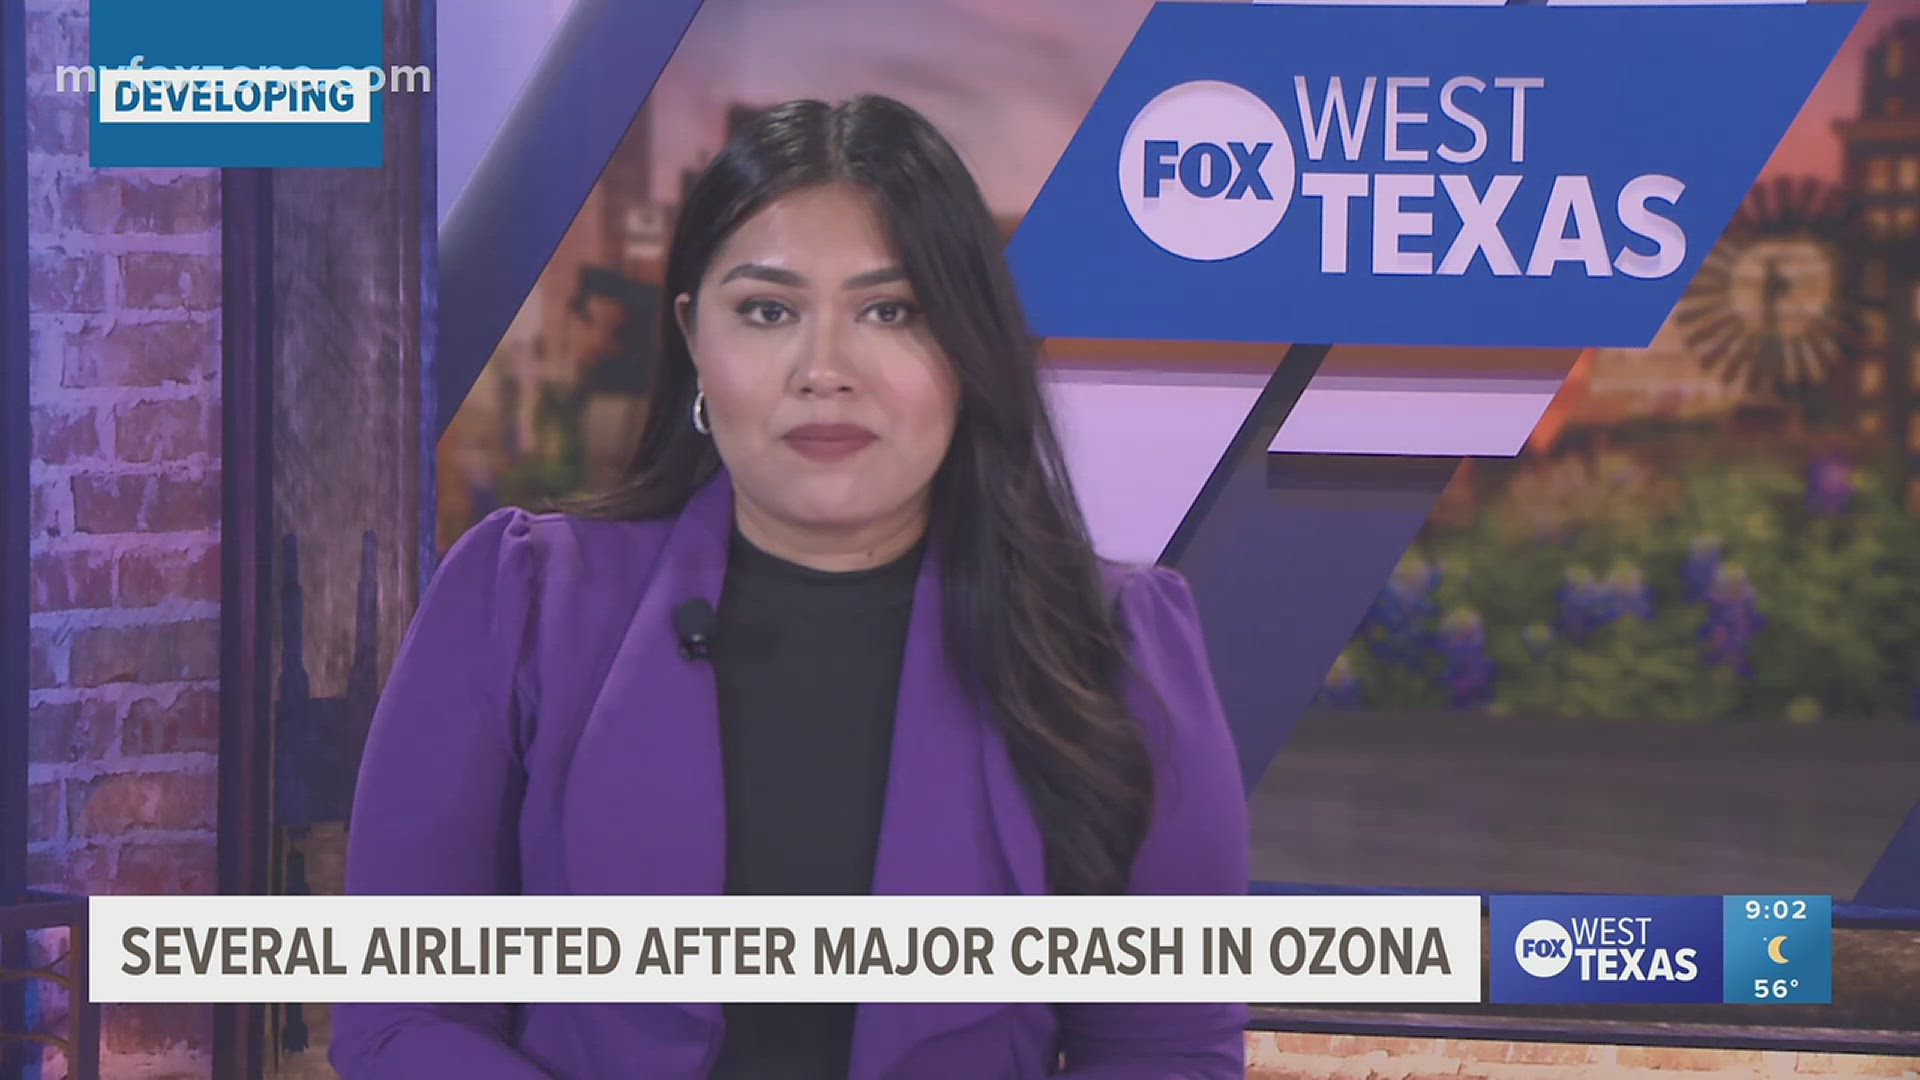 Several people were airlifted after a major crash in Ozona, well bring more information as it becomes available.